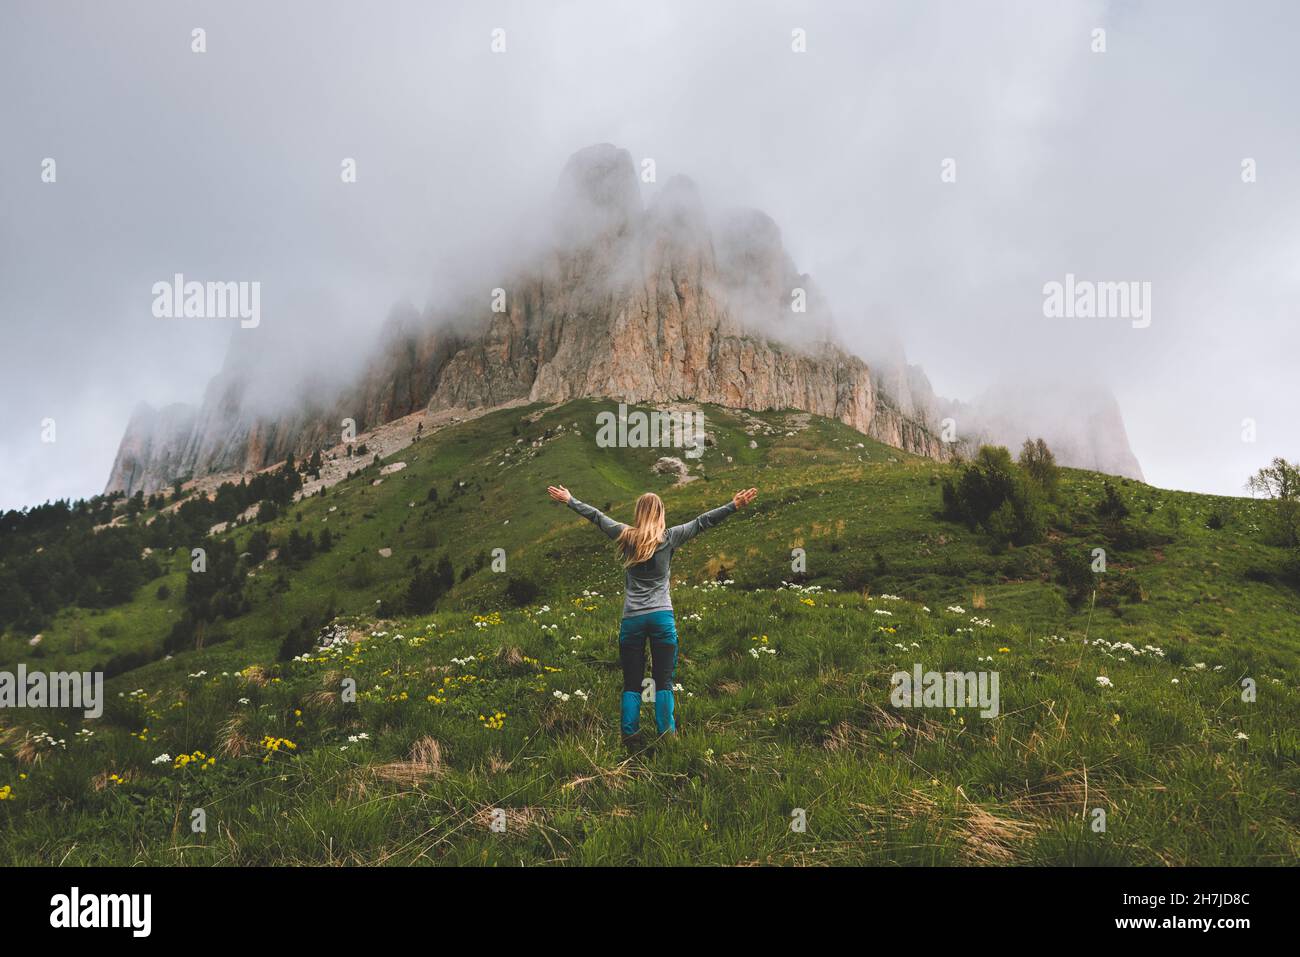 Hiking adventures in foggy mountains woman hiker raised hands travel solo extreme vacations outdoor healthy lifestyle active trip Stock Photo